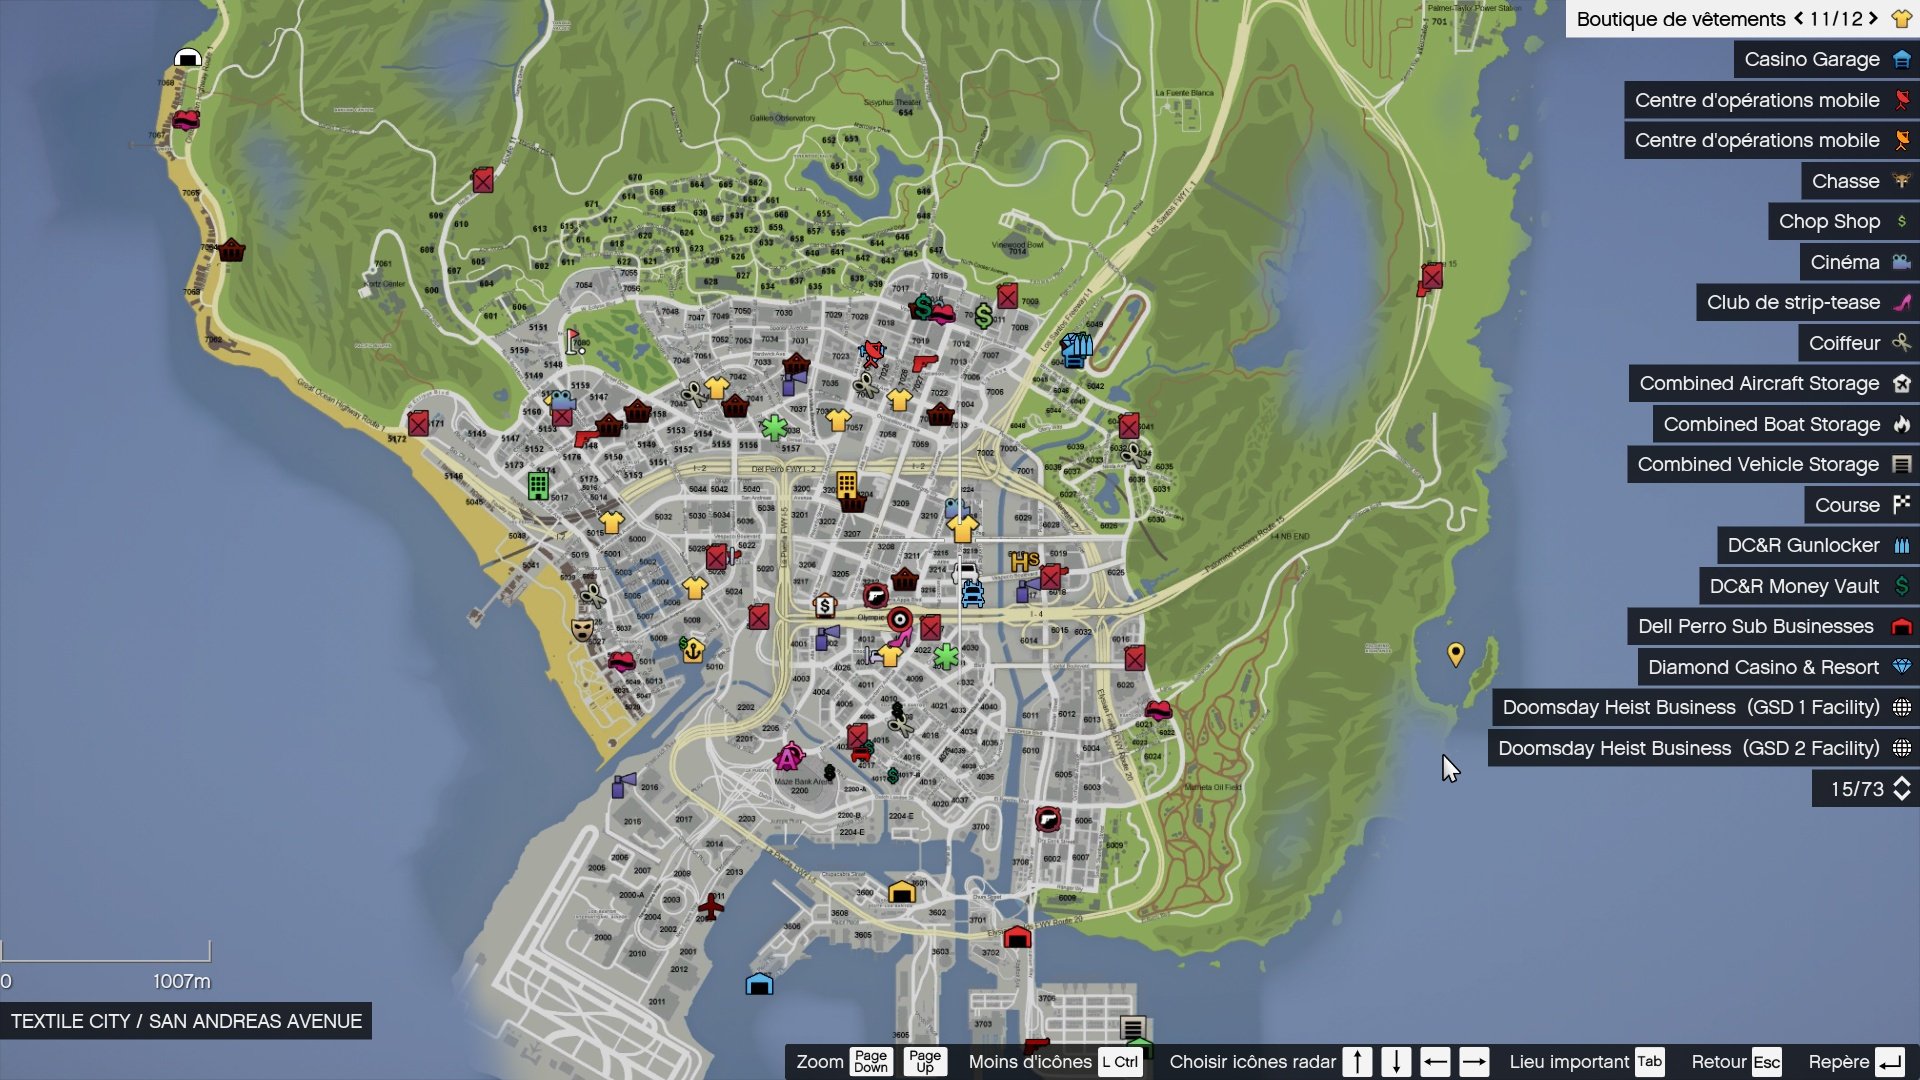 gta 5 number of locations